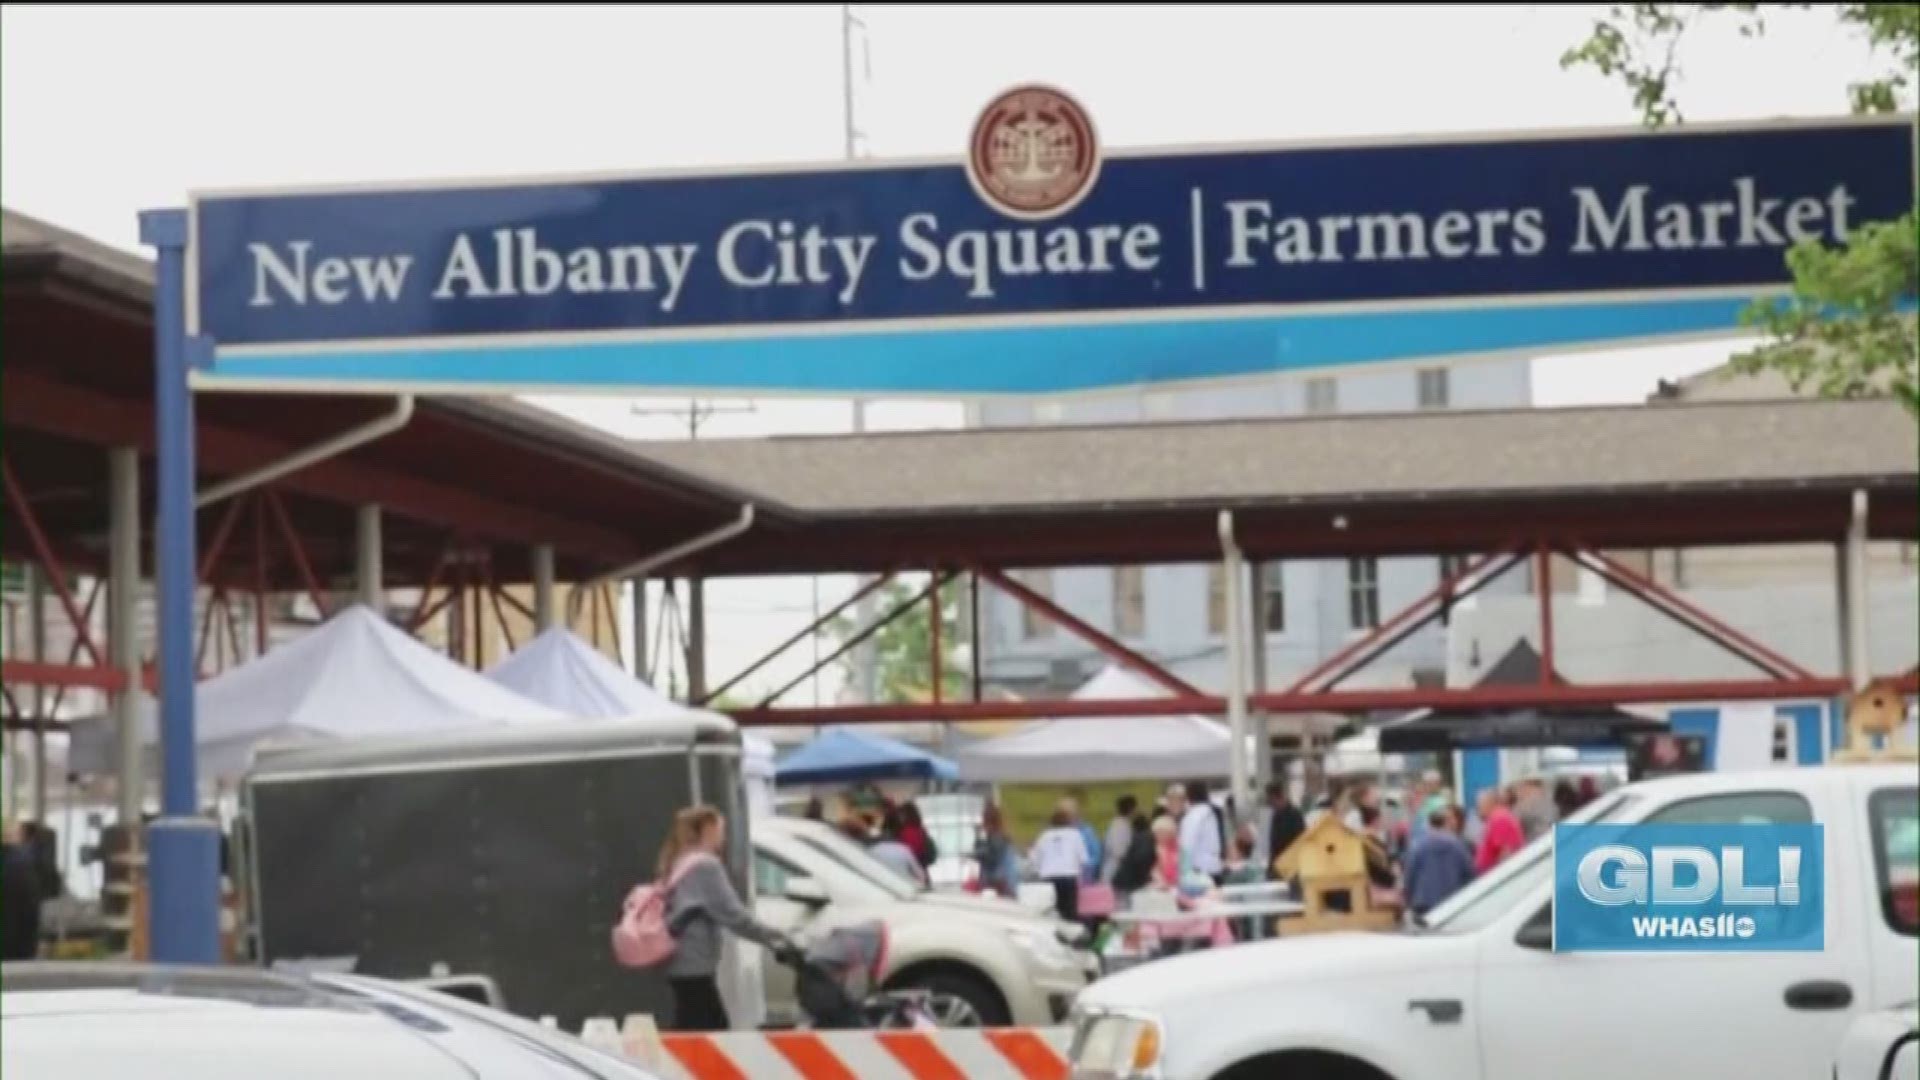 Great Day Live's Angie Fenton takes us on a tour of the New Albany Farmers Market.